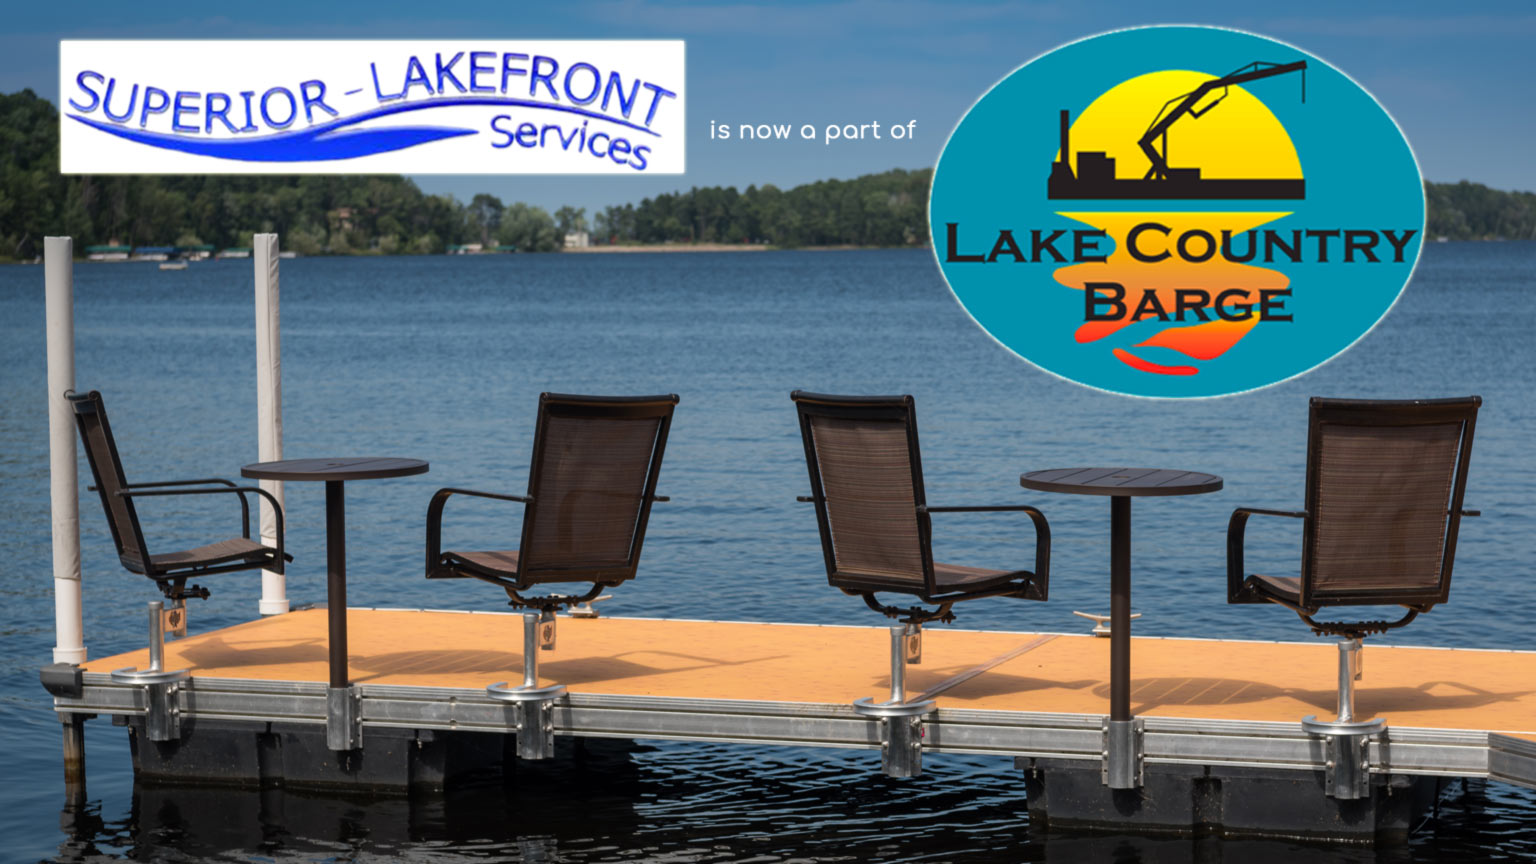 Superior Lakefront Services is now part of Lake Country Barge